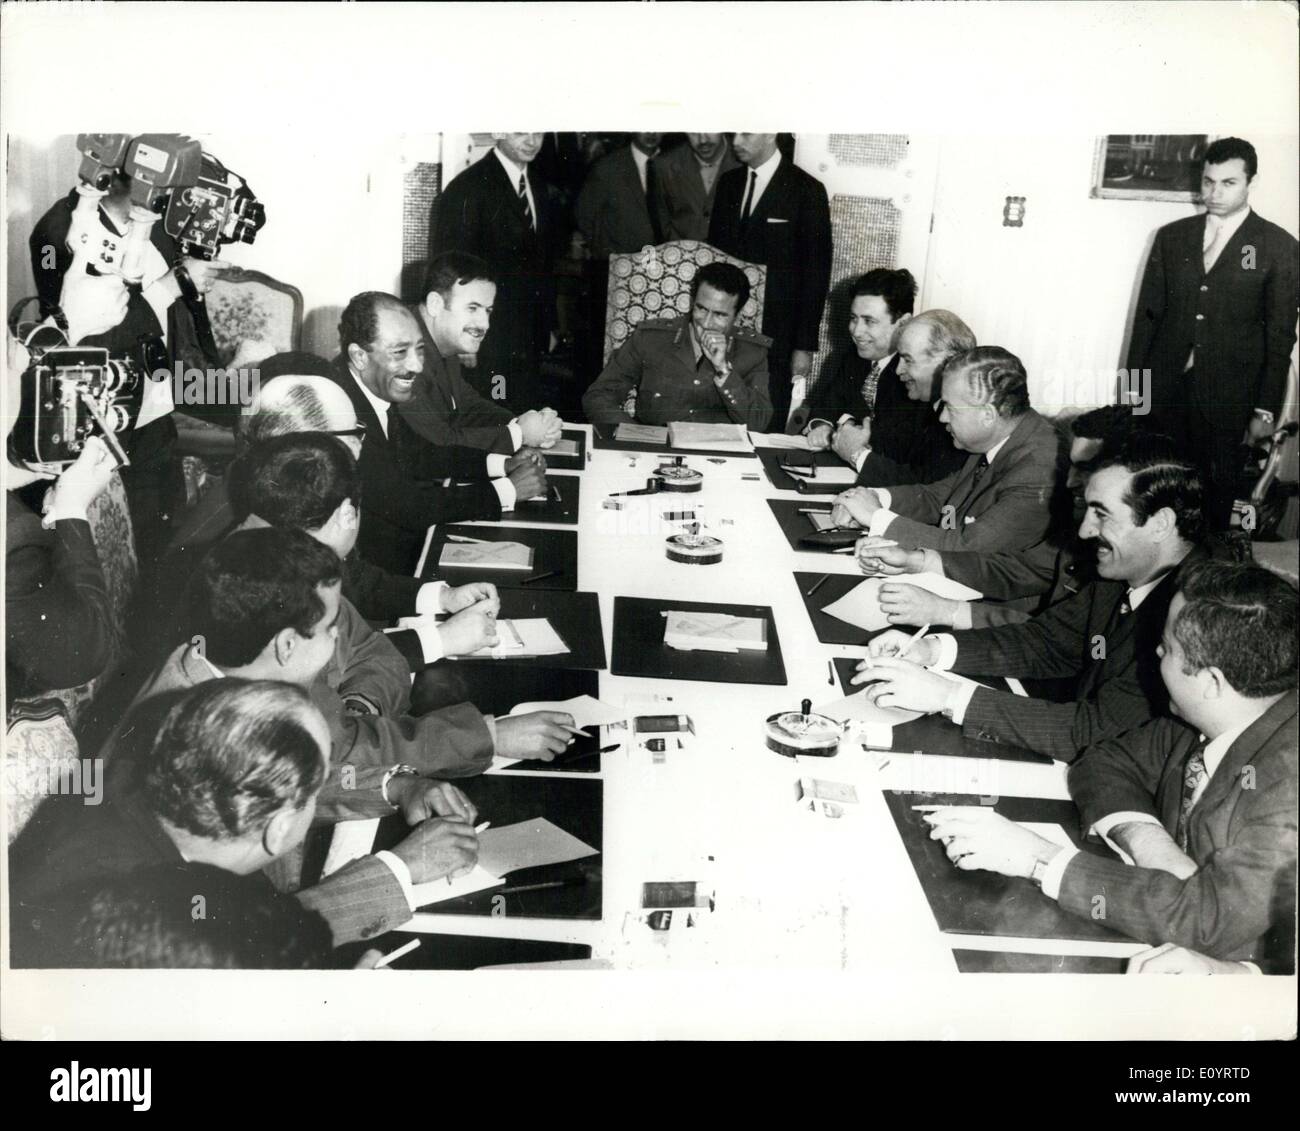 Apr. 23, 1971 - Tripoli heads hold talks in Benghazi. Decision to form Federation of Arab Republics.: At meeting held recently in Benghazi Egypt, Syria, and Libya took the decision to form the Federation of Arab Republic. Photo shows the three Presidents during their meeting at the Guest Palace in Benghazi. Presideng the meeting is Libyan President Moamer El Geddafy flanked on the left by Syrian and UAR Presidents Gen. HAfez El Acsad and Anwar El Sadat, and on right by UAR Vice-Presidents Aly Sabry and Hussein El Chaffei. Stock Photo